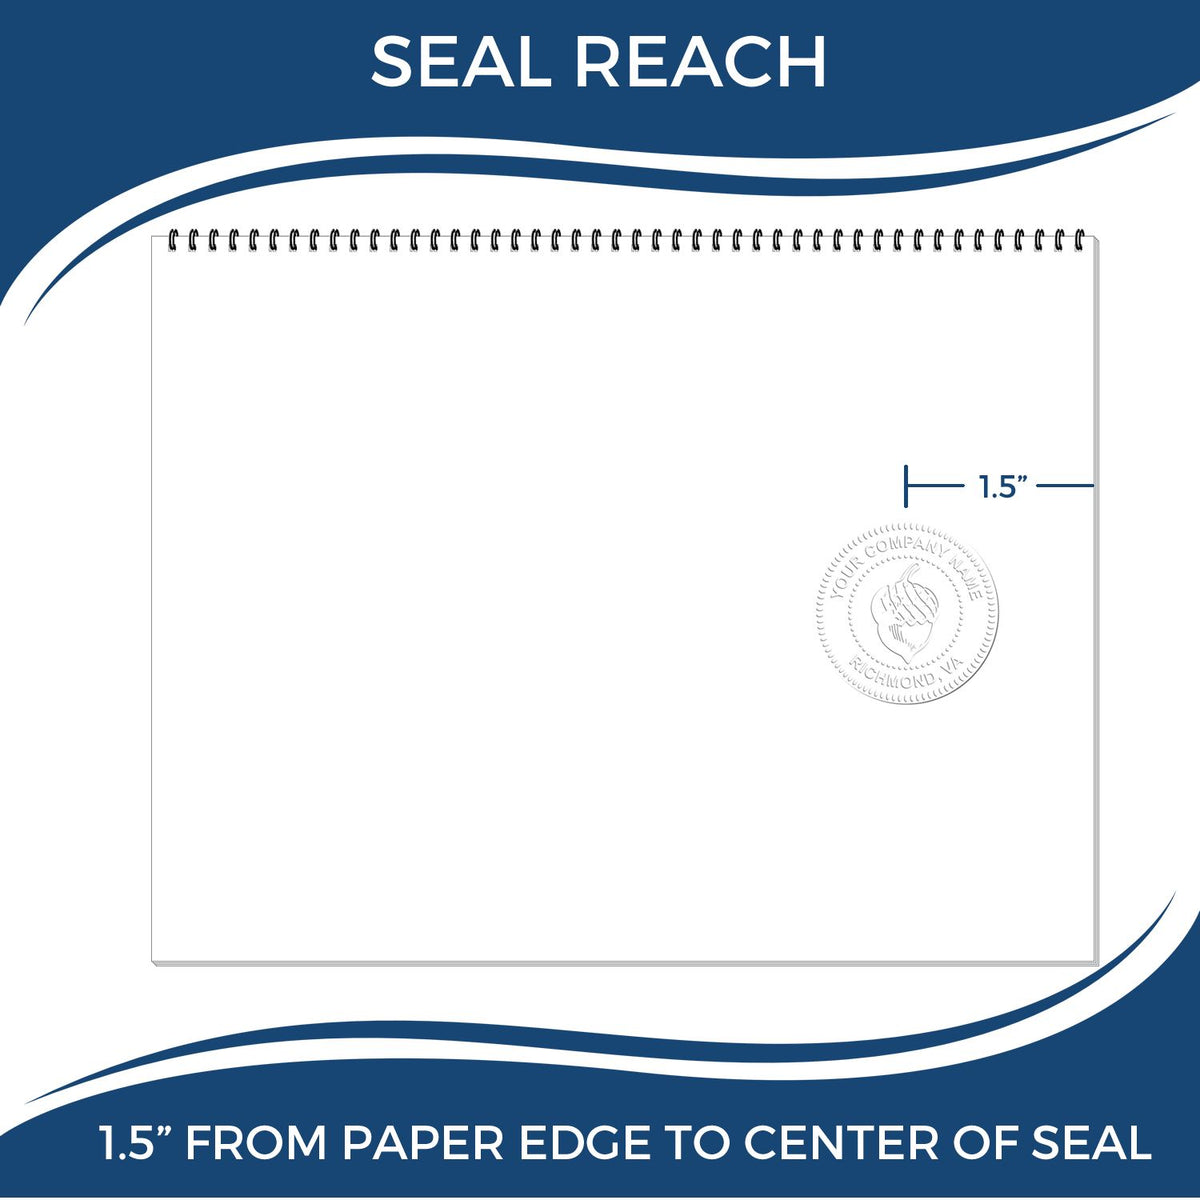 An infographic showing the seal reach which is represented by a ruler and a miniature seal image of the Gift North Dakota Land Surveyor Seal